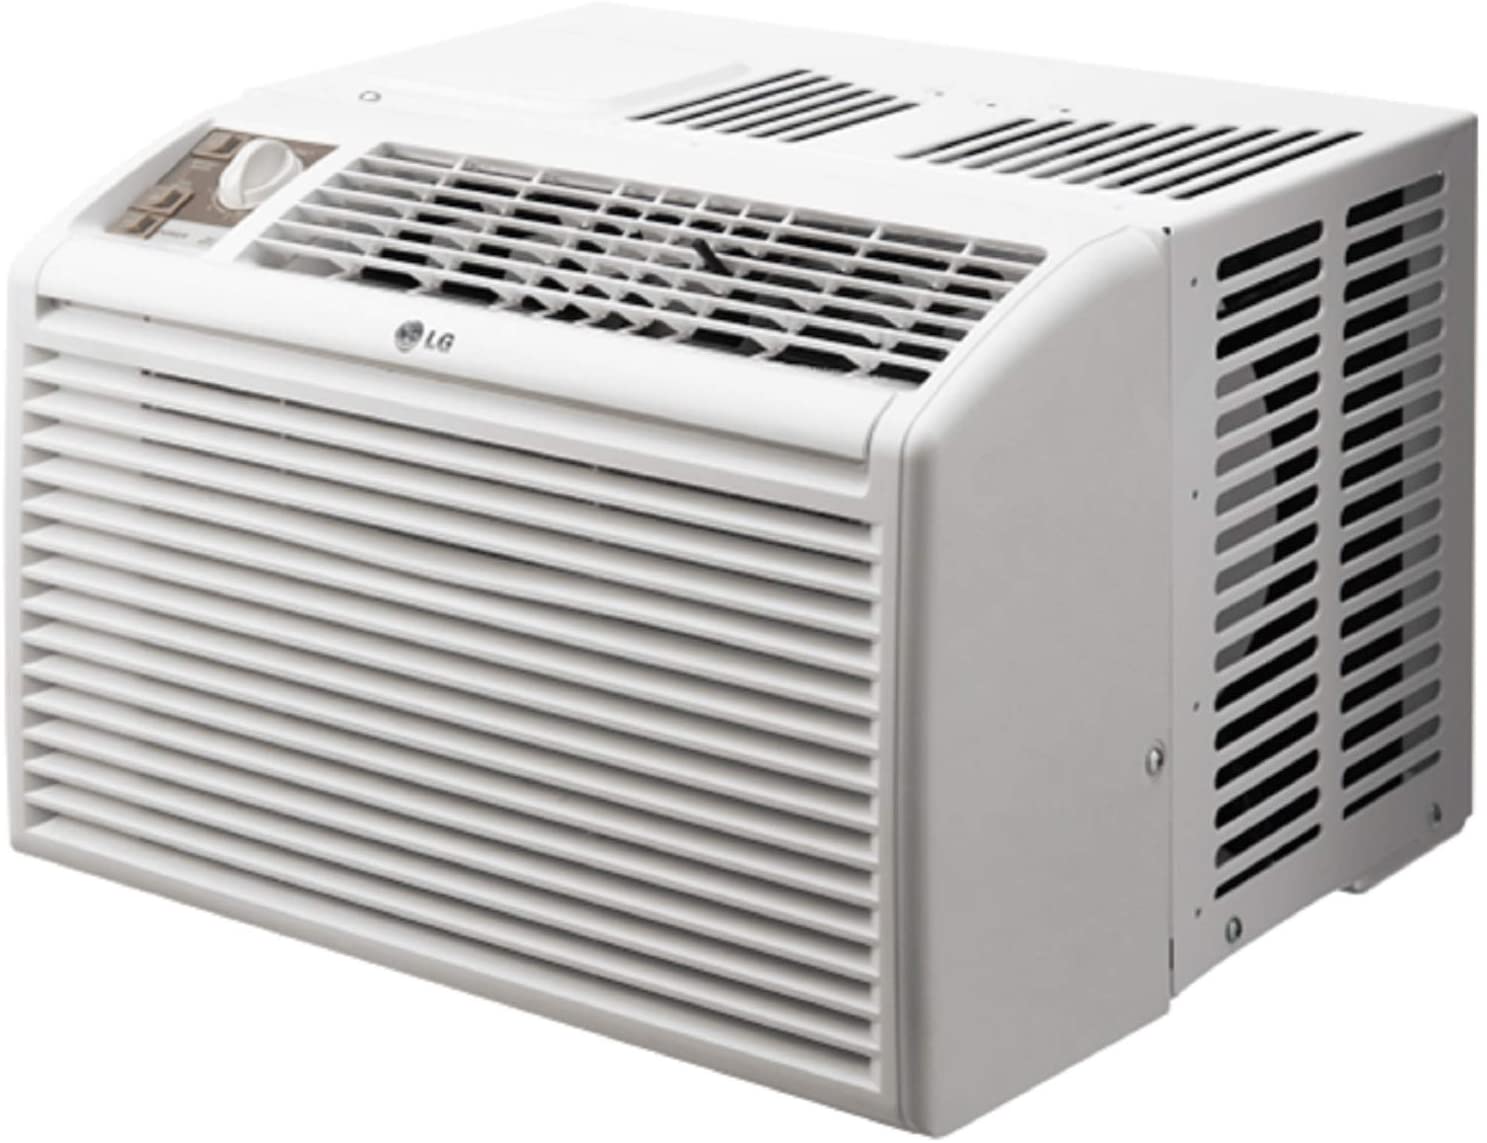 611OcjVHJeL. AC SL1500 1 10 BEST 5000 BTU AIR CONDITIONERS 2021 [WINDOW & PORTABLE ACs] SMALL AC REVIEW FOR 150 Ft